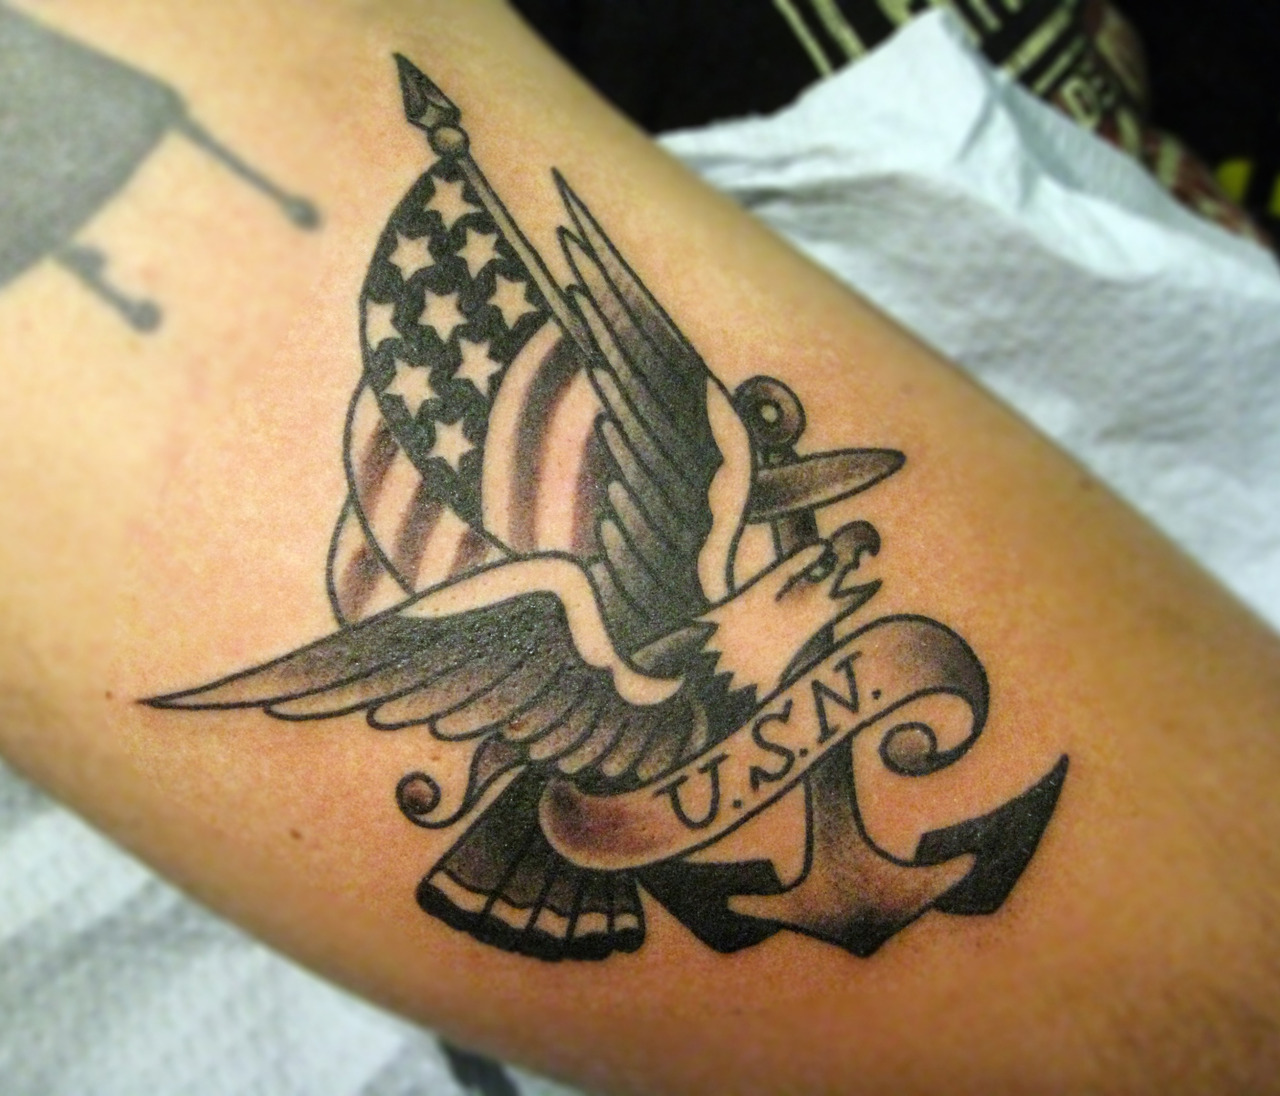 Navy Tattoos Designs, Ideas and Meaning | Tattoos For You